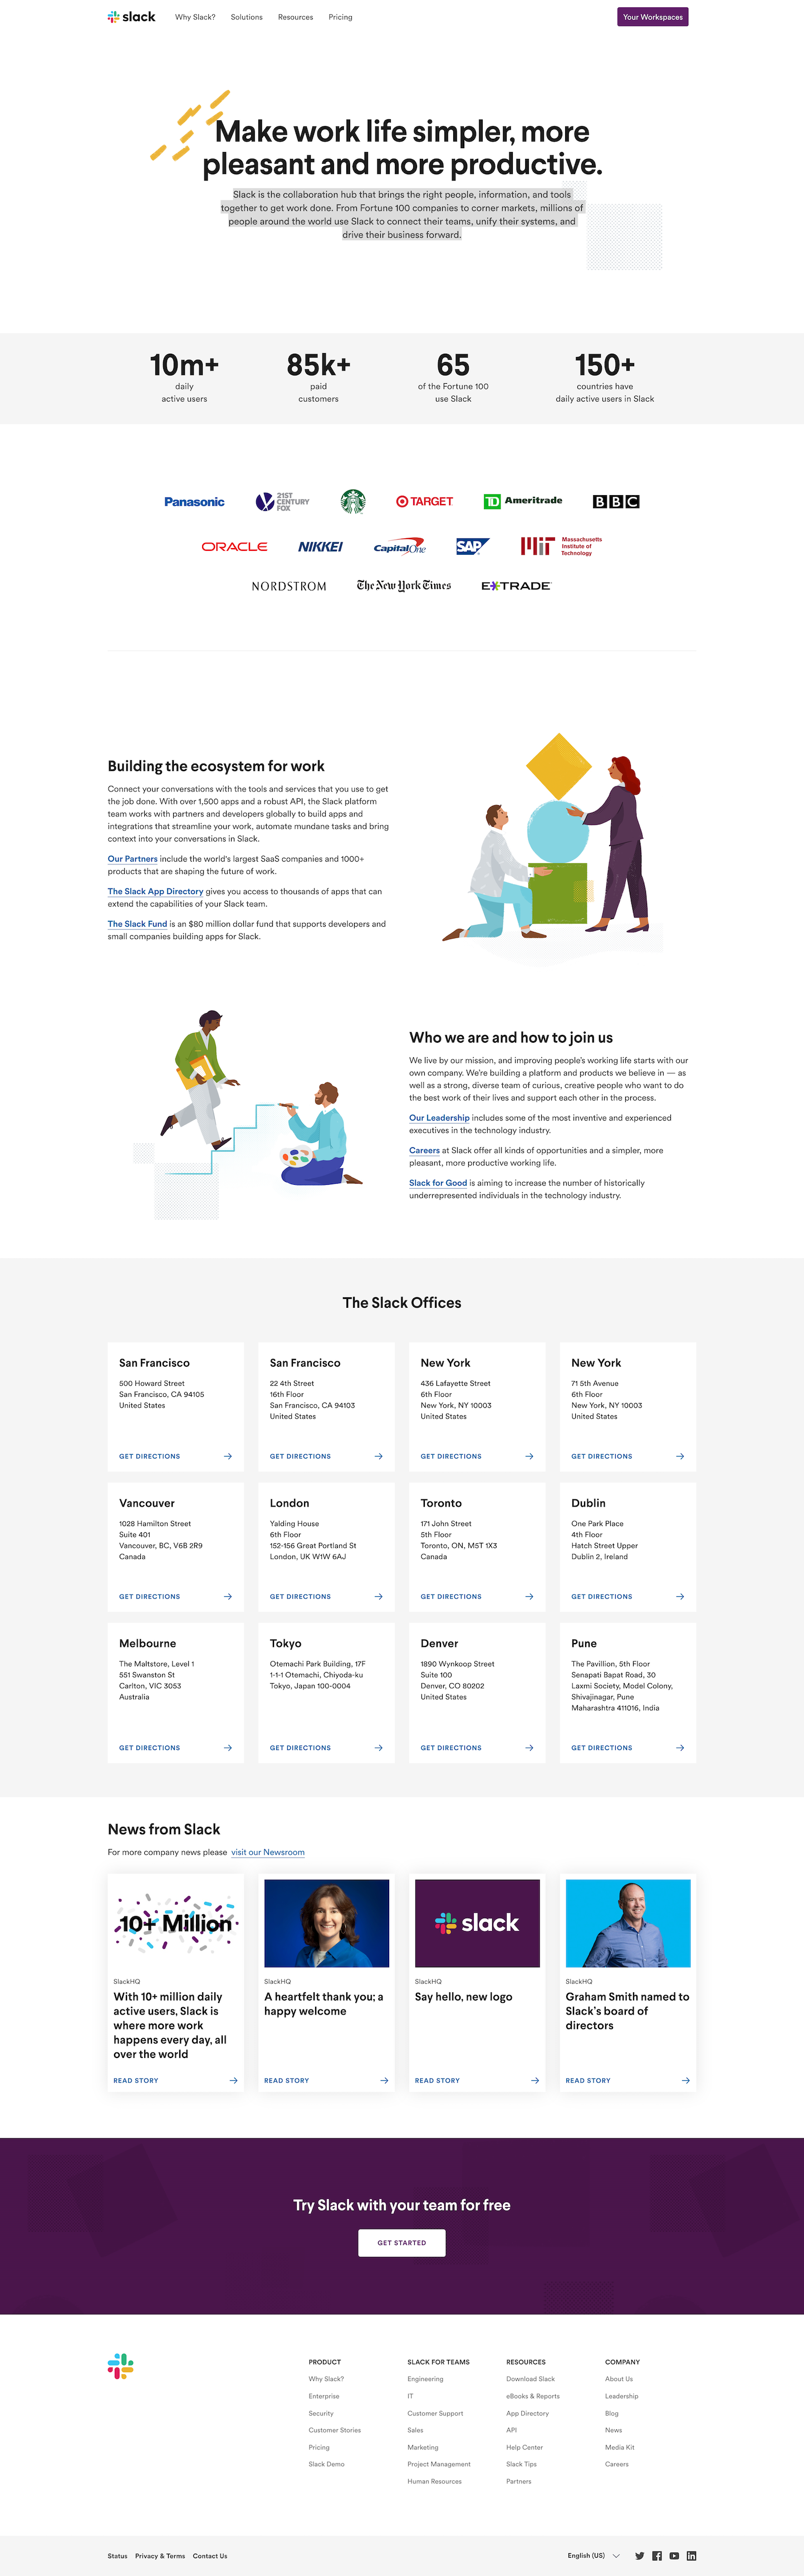 Screenshot of the About page from the Slack website.